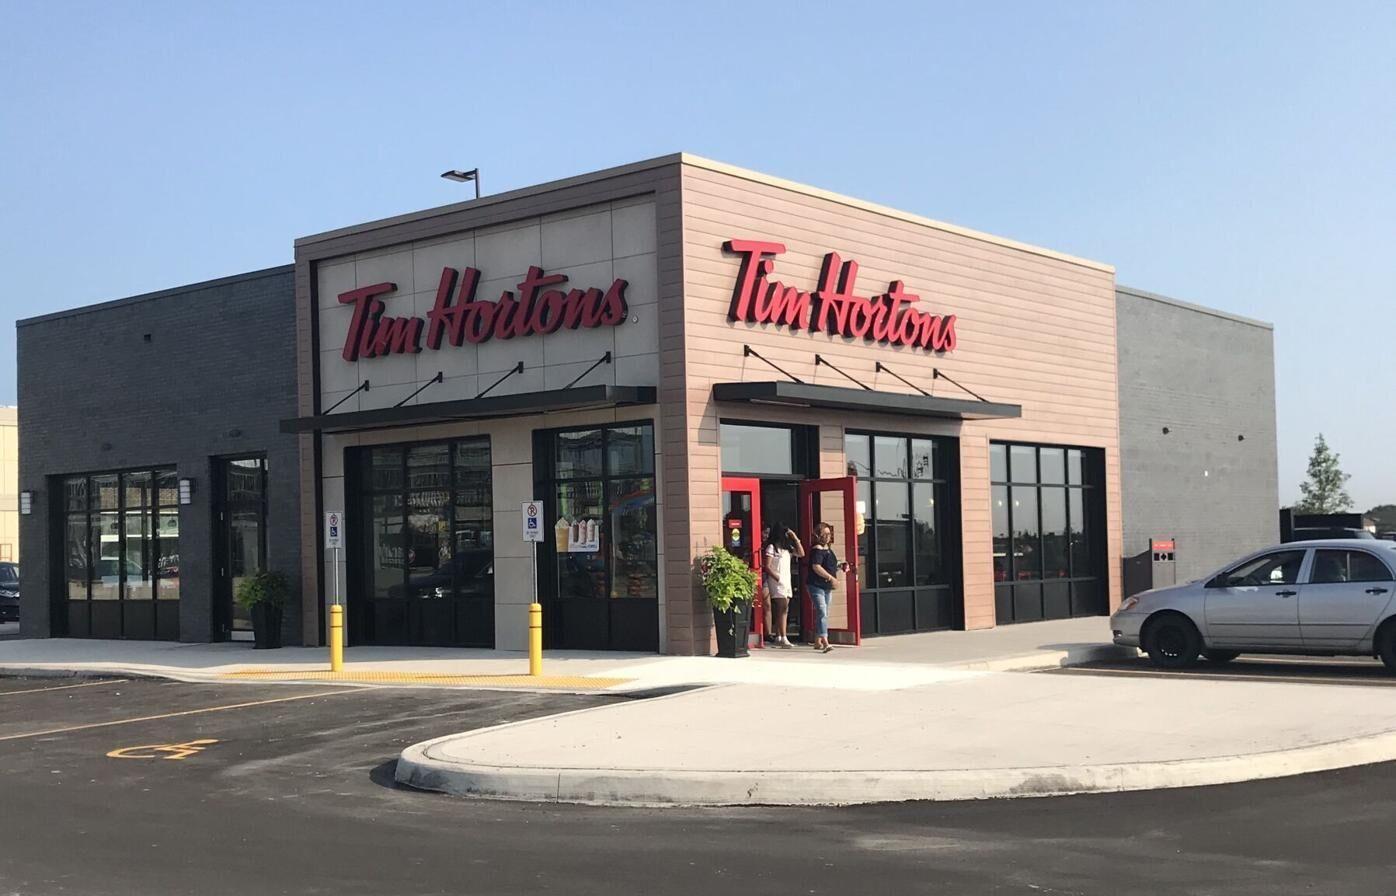 Tim Hortons and BAILEYS® announce non-alcoholic menu collaboration that  will launch later this year